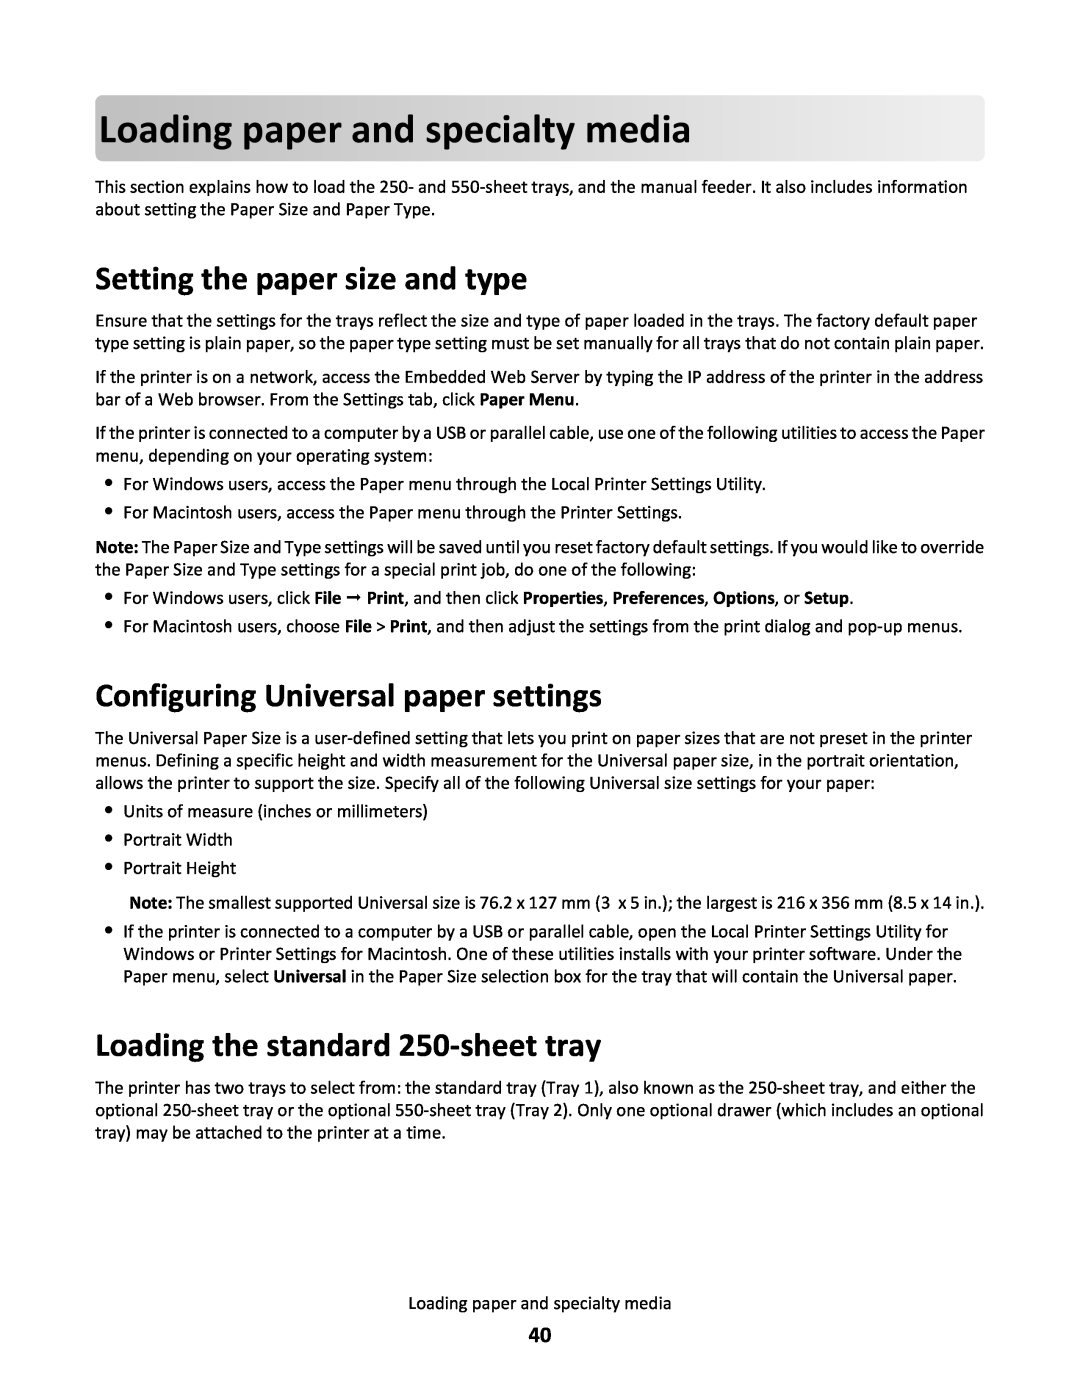 Lexmark 34S0100 Loading paper andspecialtymedia, Setting the paper size and type, Configuring Universal paper settings 